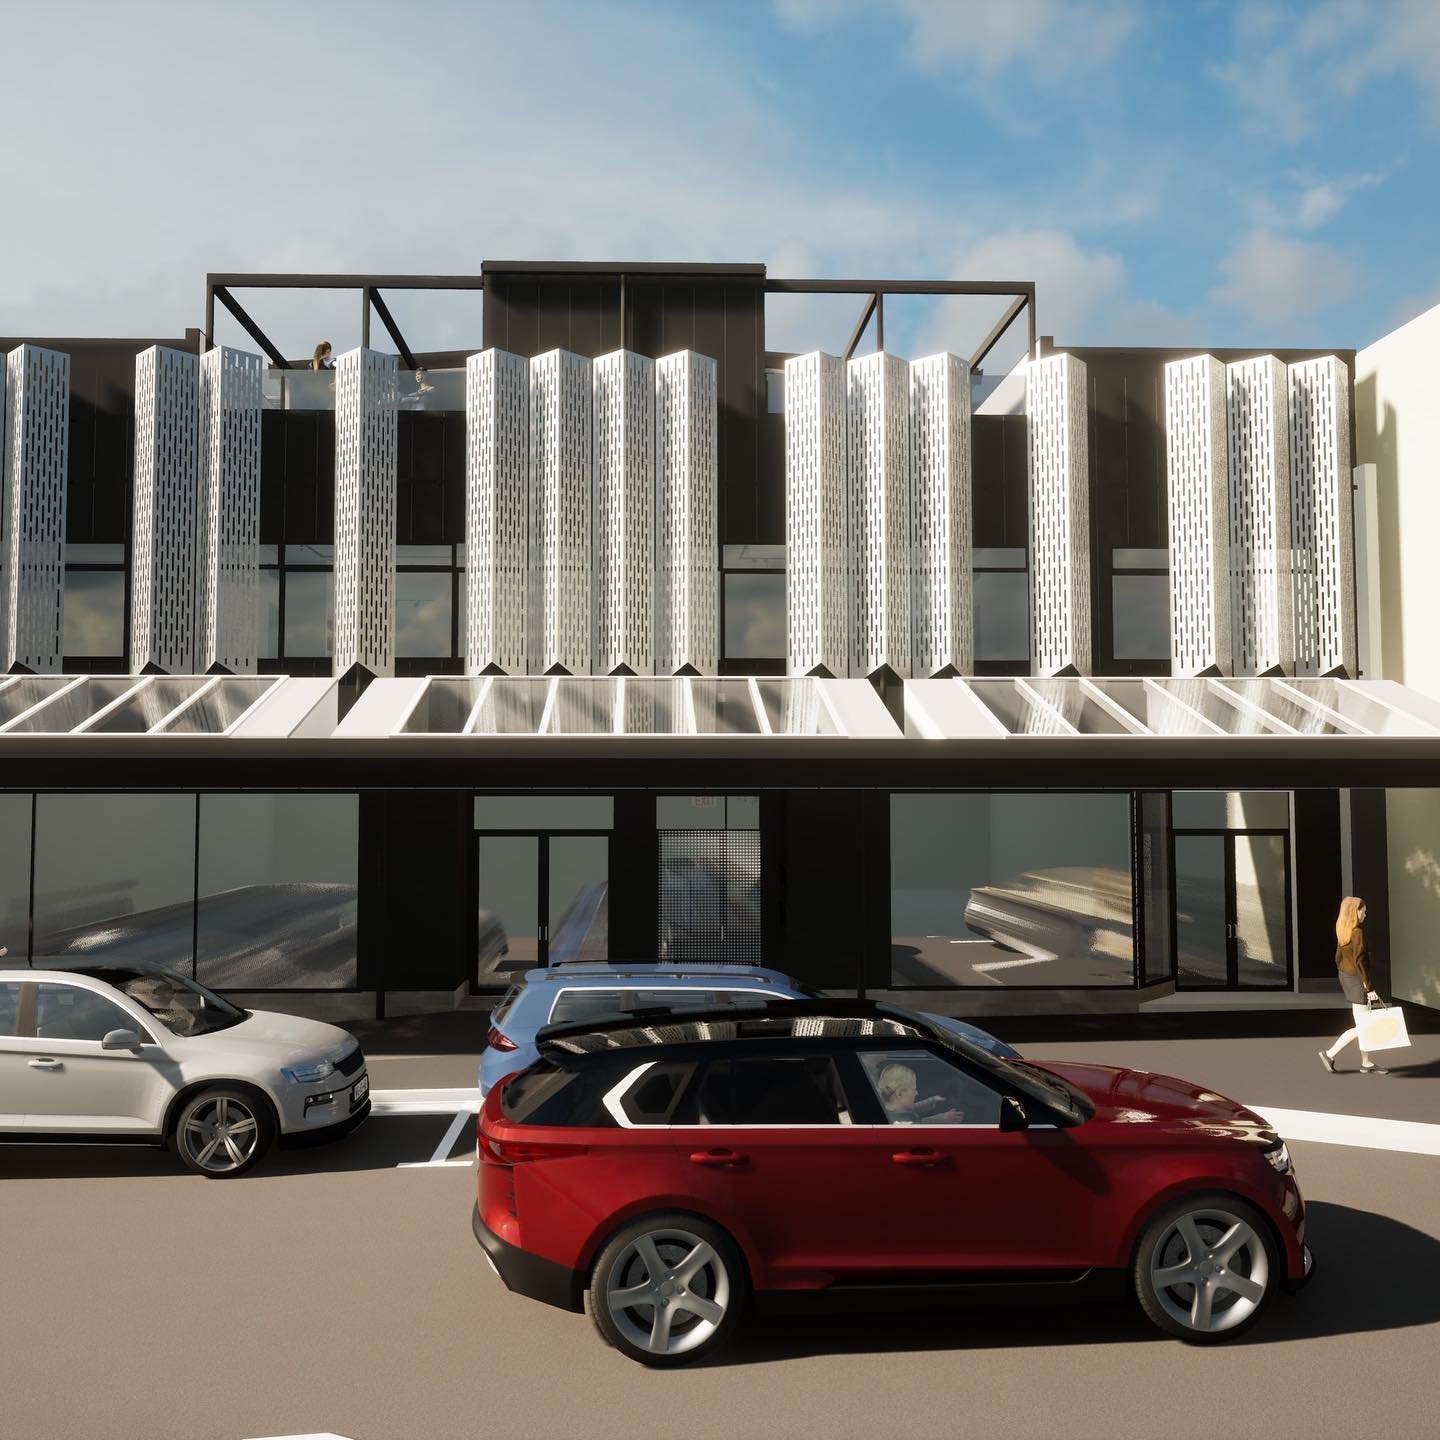 More adaptive reuse and inner city living is coming to Nelson soon! The conversion of this existing office building to become apartments with rooftop terraces is now underway on site with the team at Scott Construction. 

#innercityliving #nelsonnz #